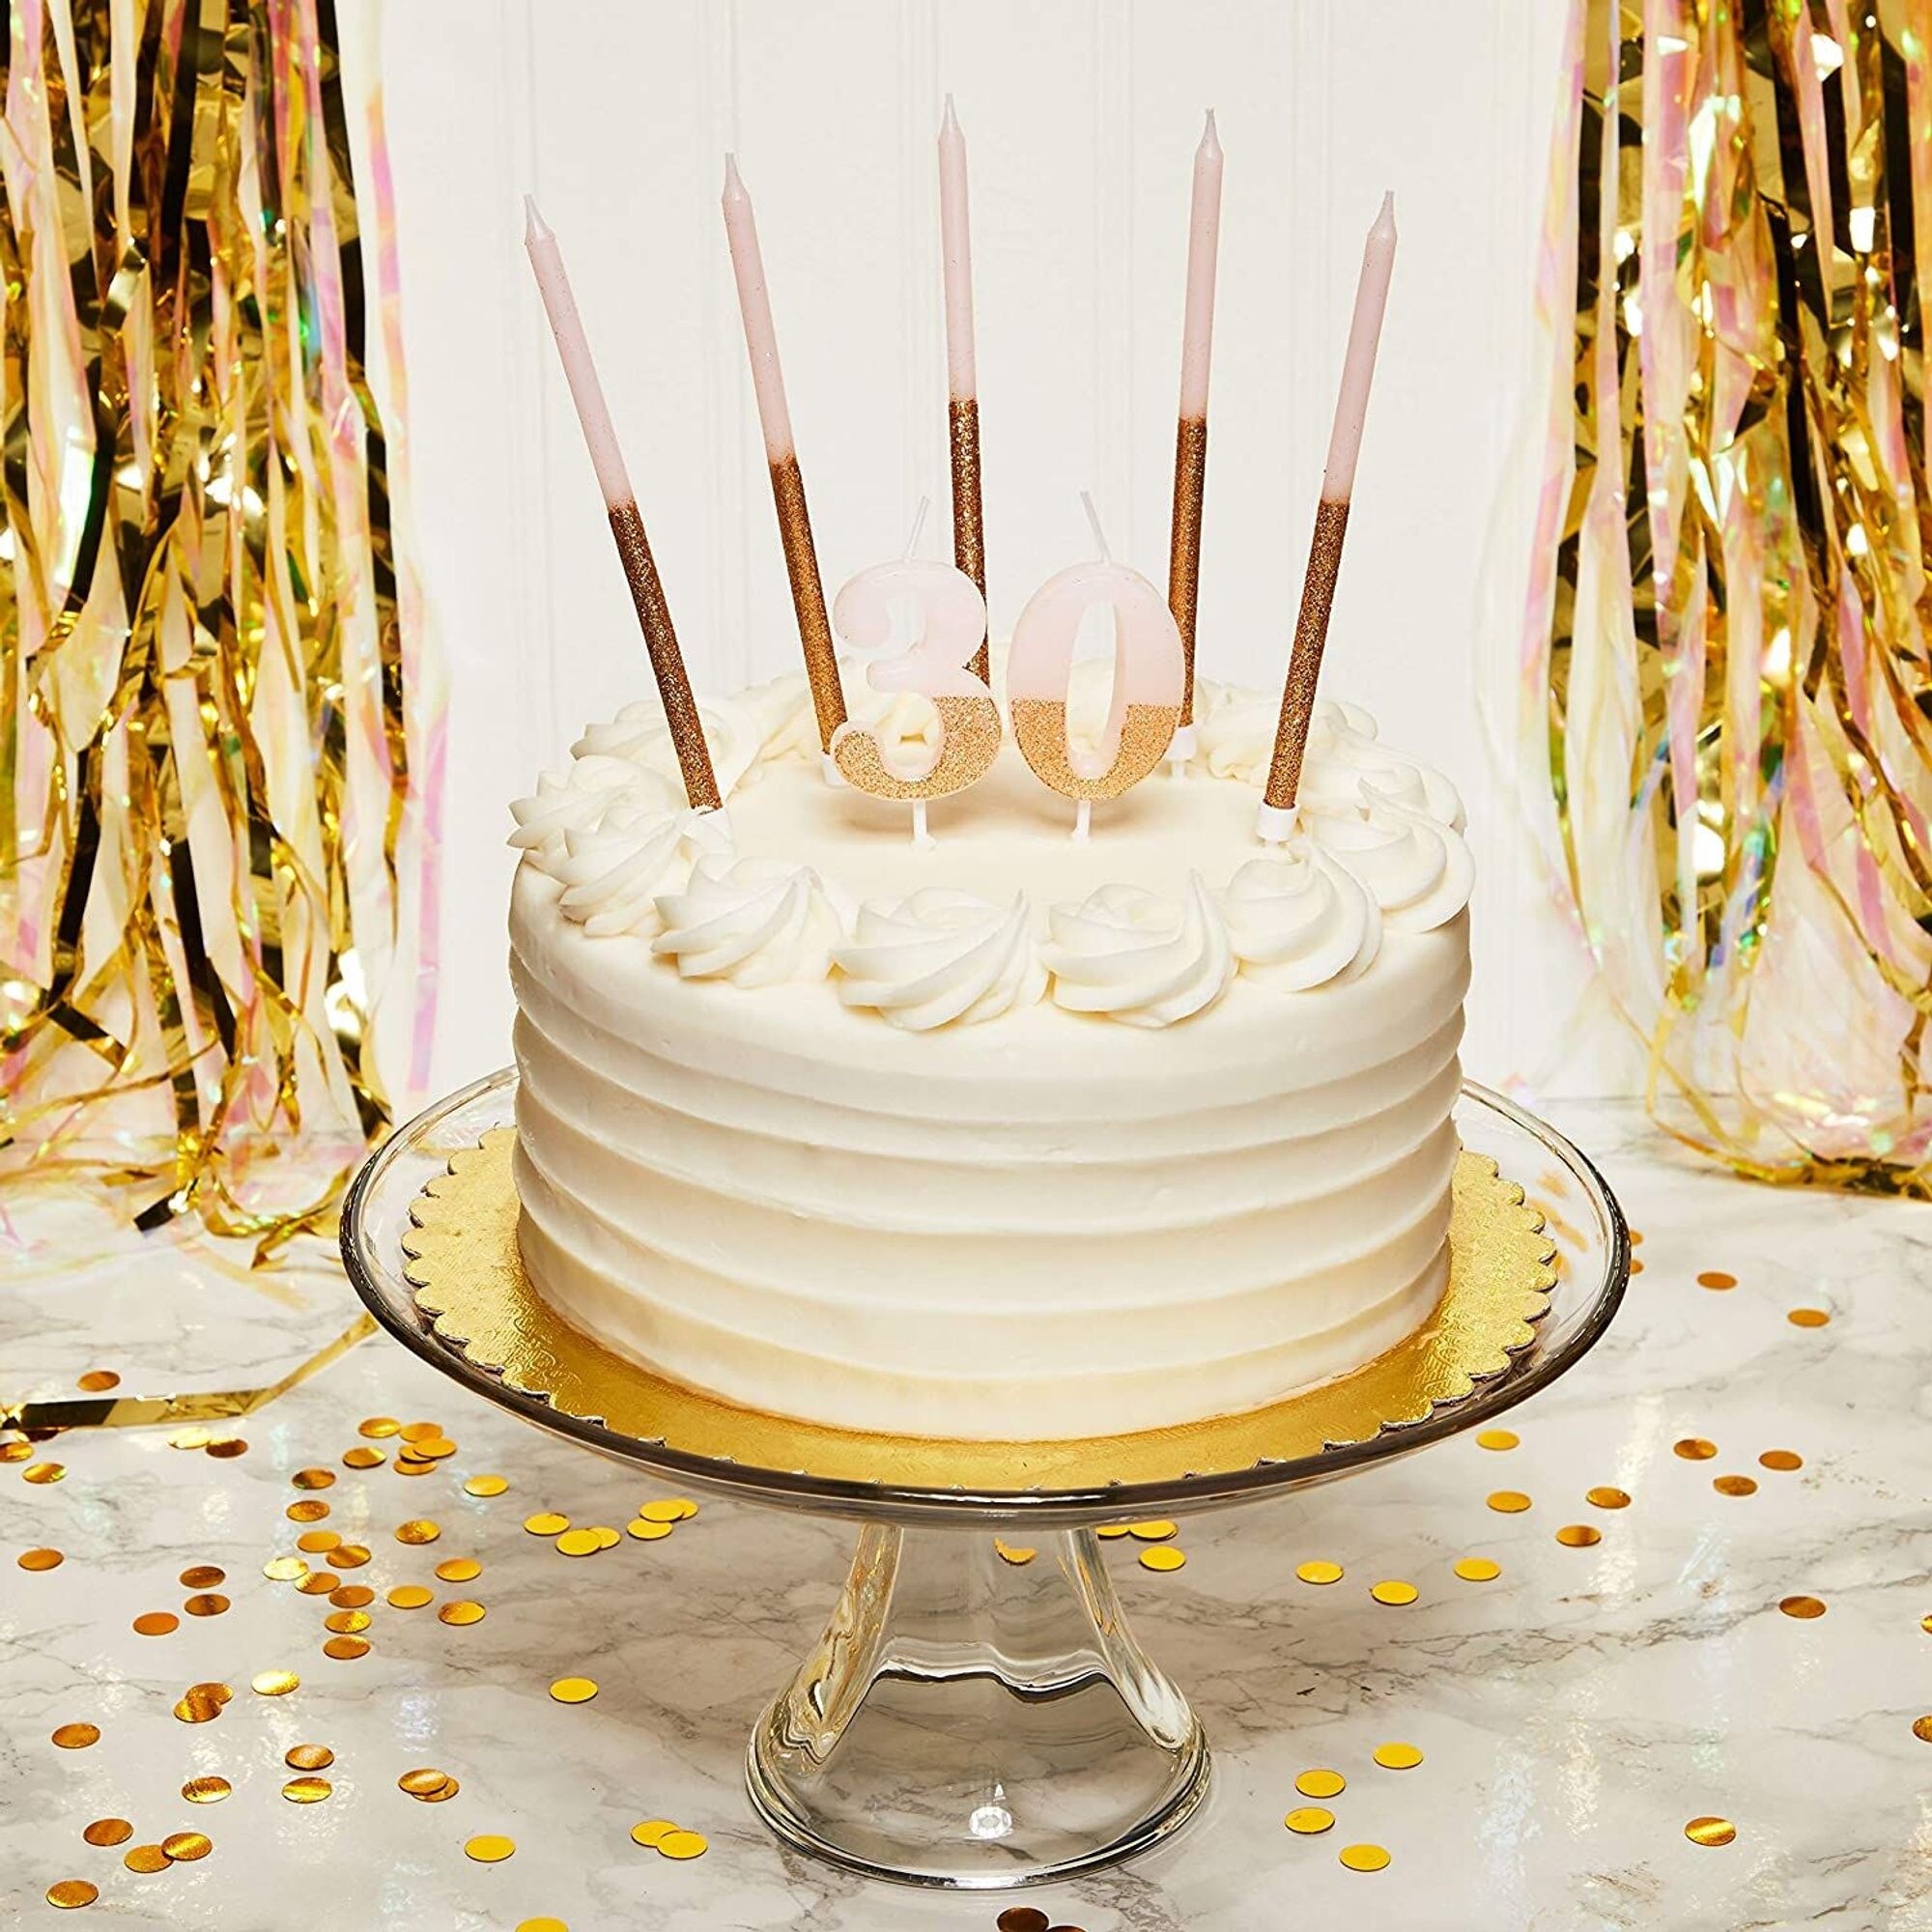 37-Count Silver Long Thin Cake Candles with Holder & "HAPPY BIRTHDAY" Letter 